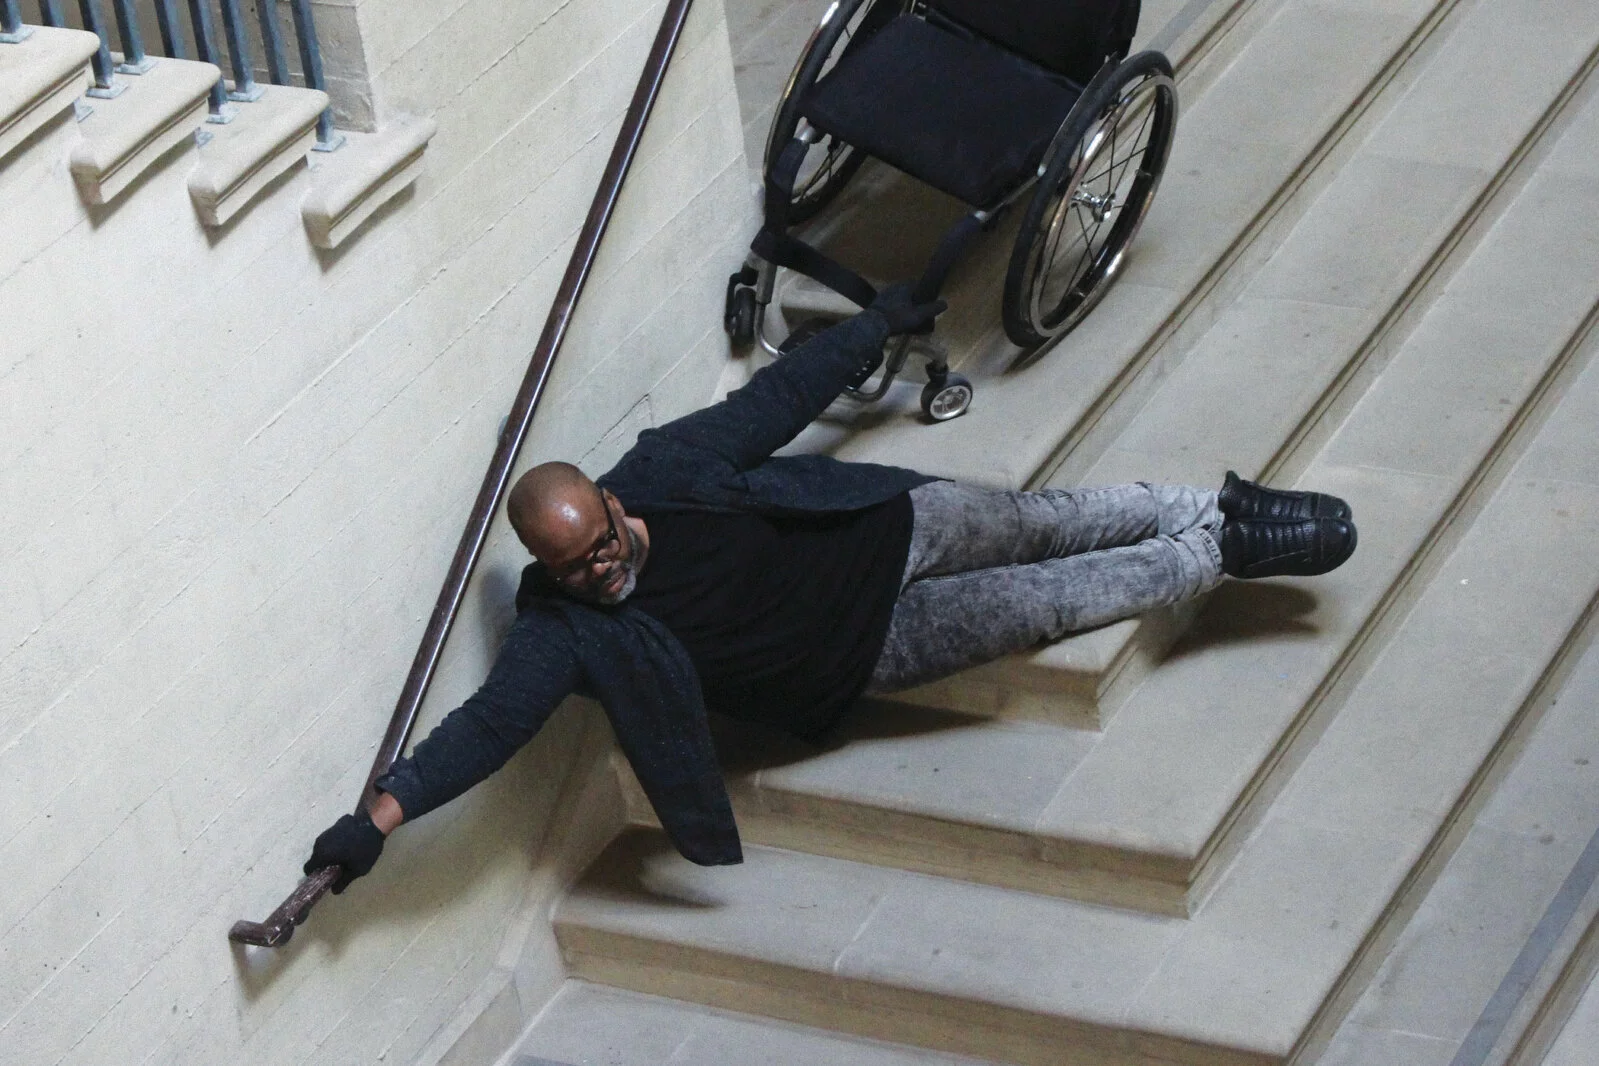 A brown-skinned, large-bodied Black person with a shaved head and beard wearing glasses, a black shirt and grey jeans with one hand on a rail and the other holding a wheelchair, seemingly floating above a set of stairs.